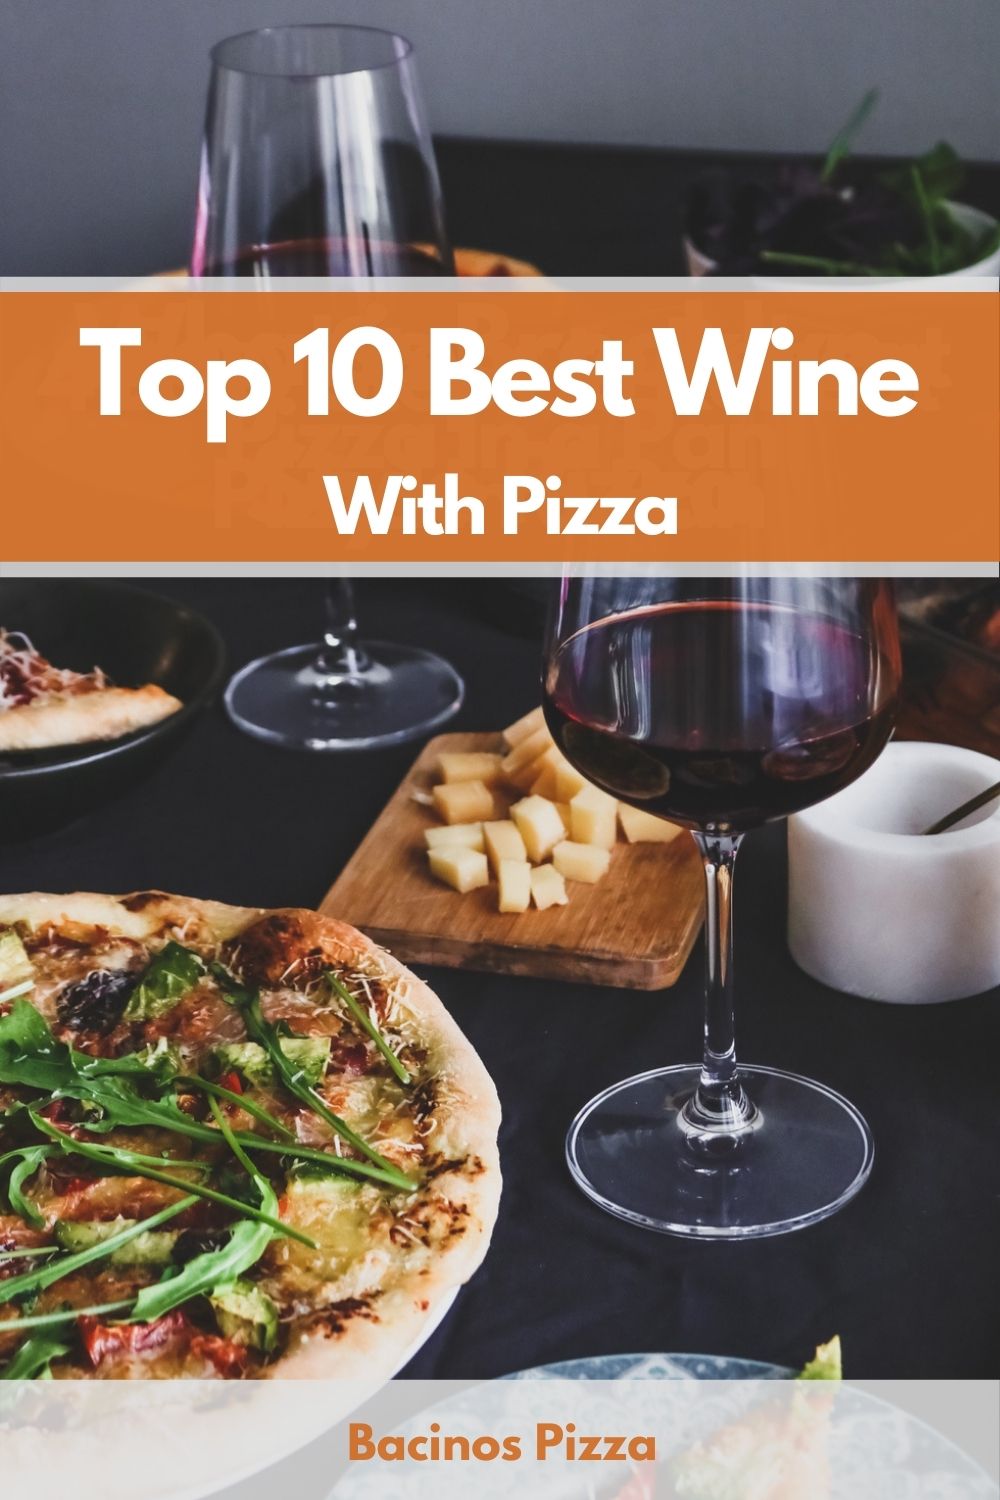 Top 10 Best Wine With Pizza pin